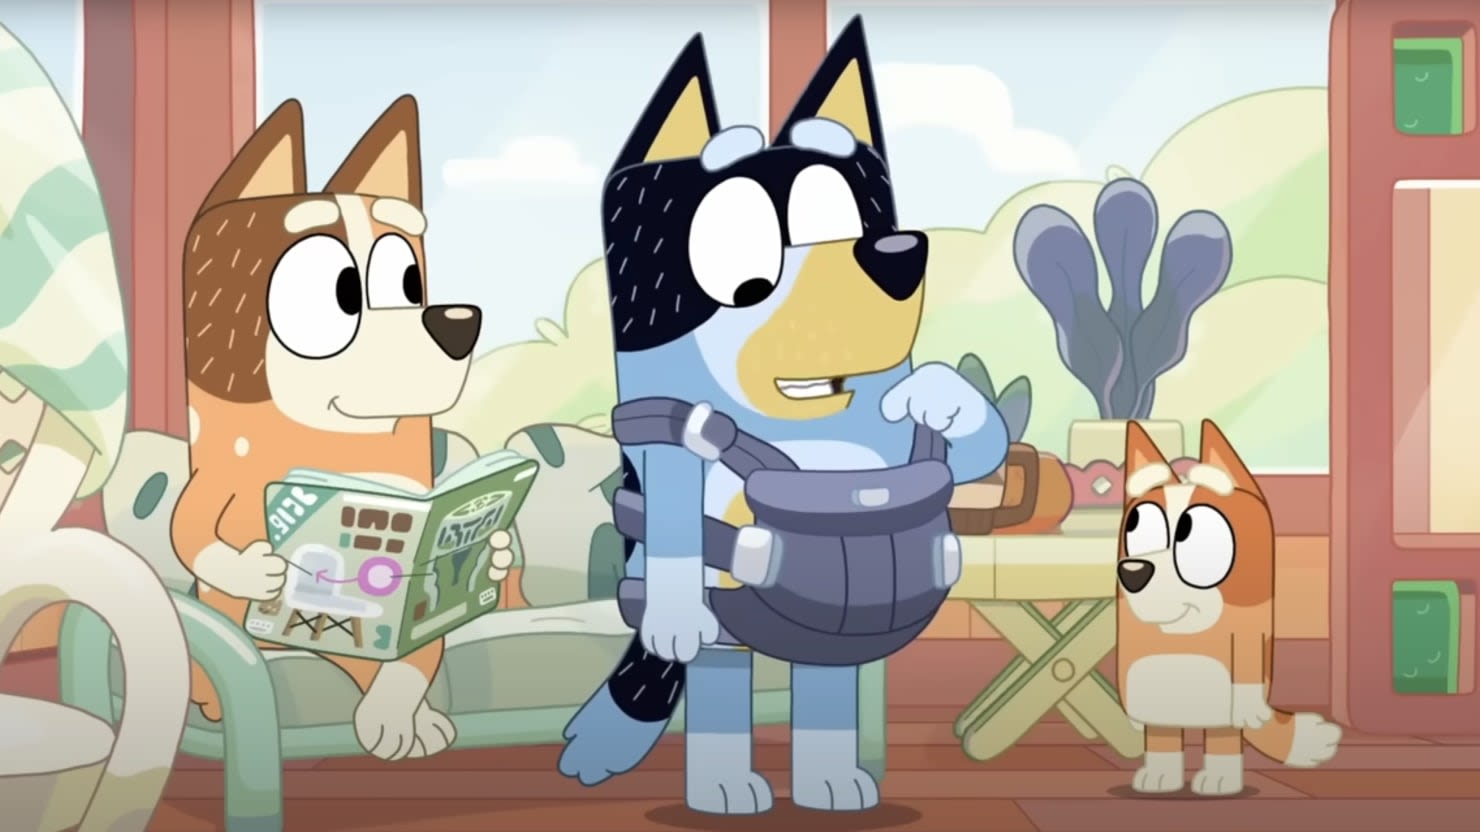 You Can Now See the Banned ‘Bluey’ Episode on YouTube